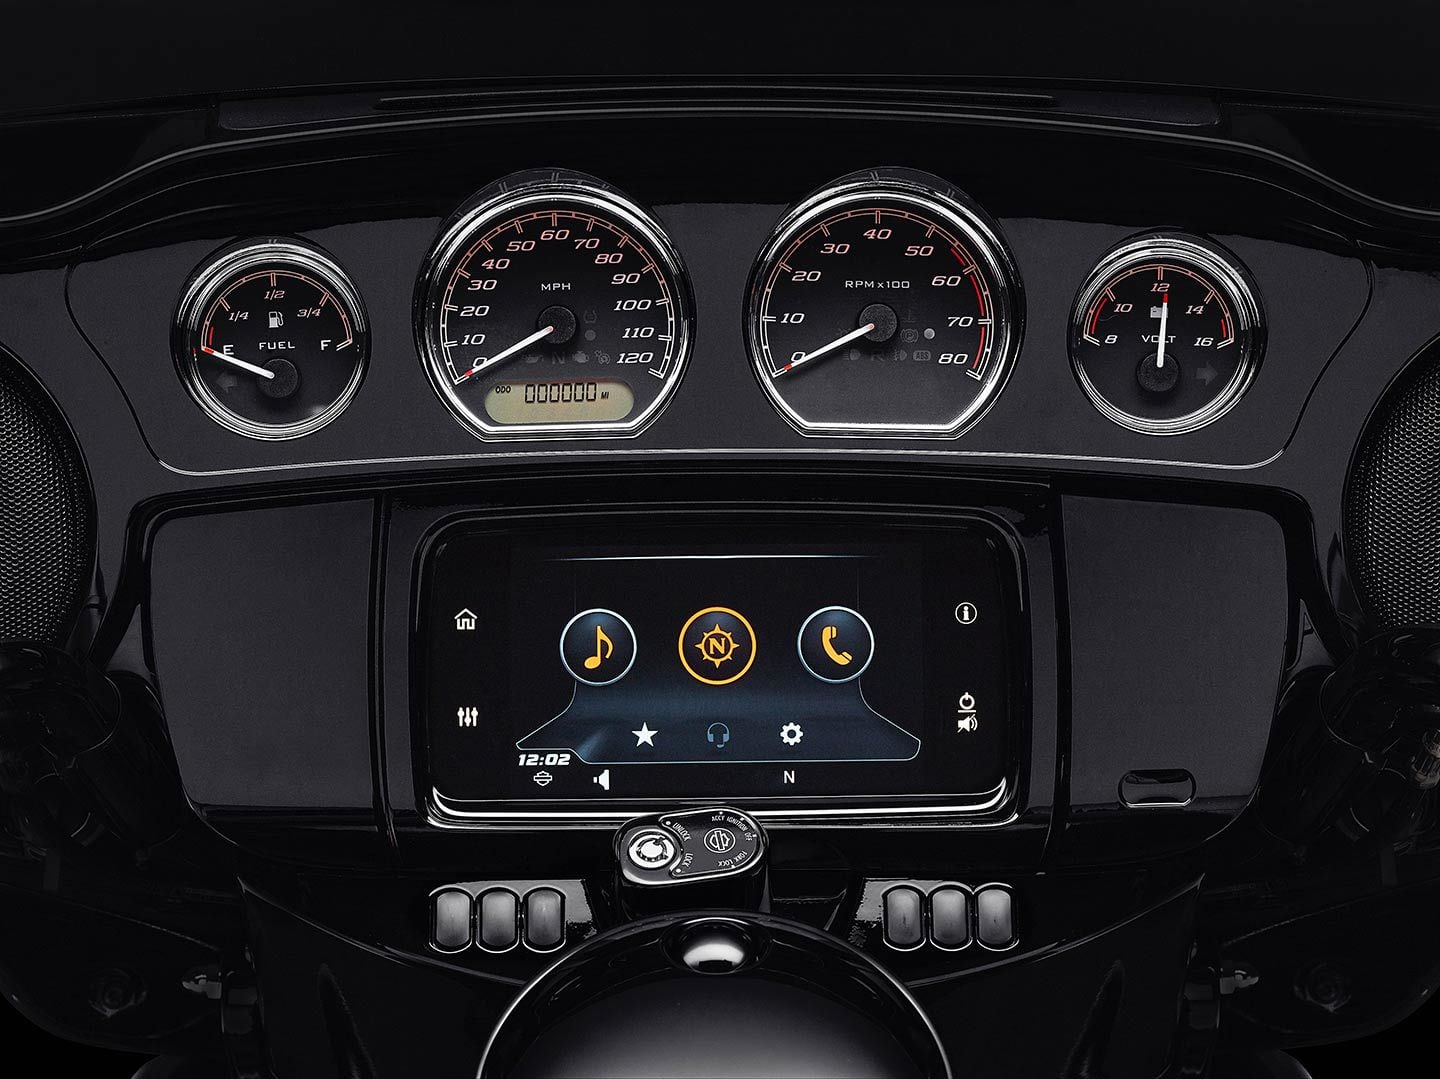 Although this image dates back to the 2020 model year FLHXS, the 5.25-inch touchscreen and analog gauges remain the same for 2023.